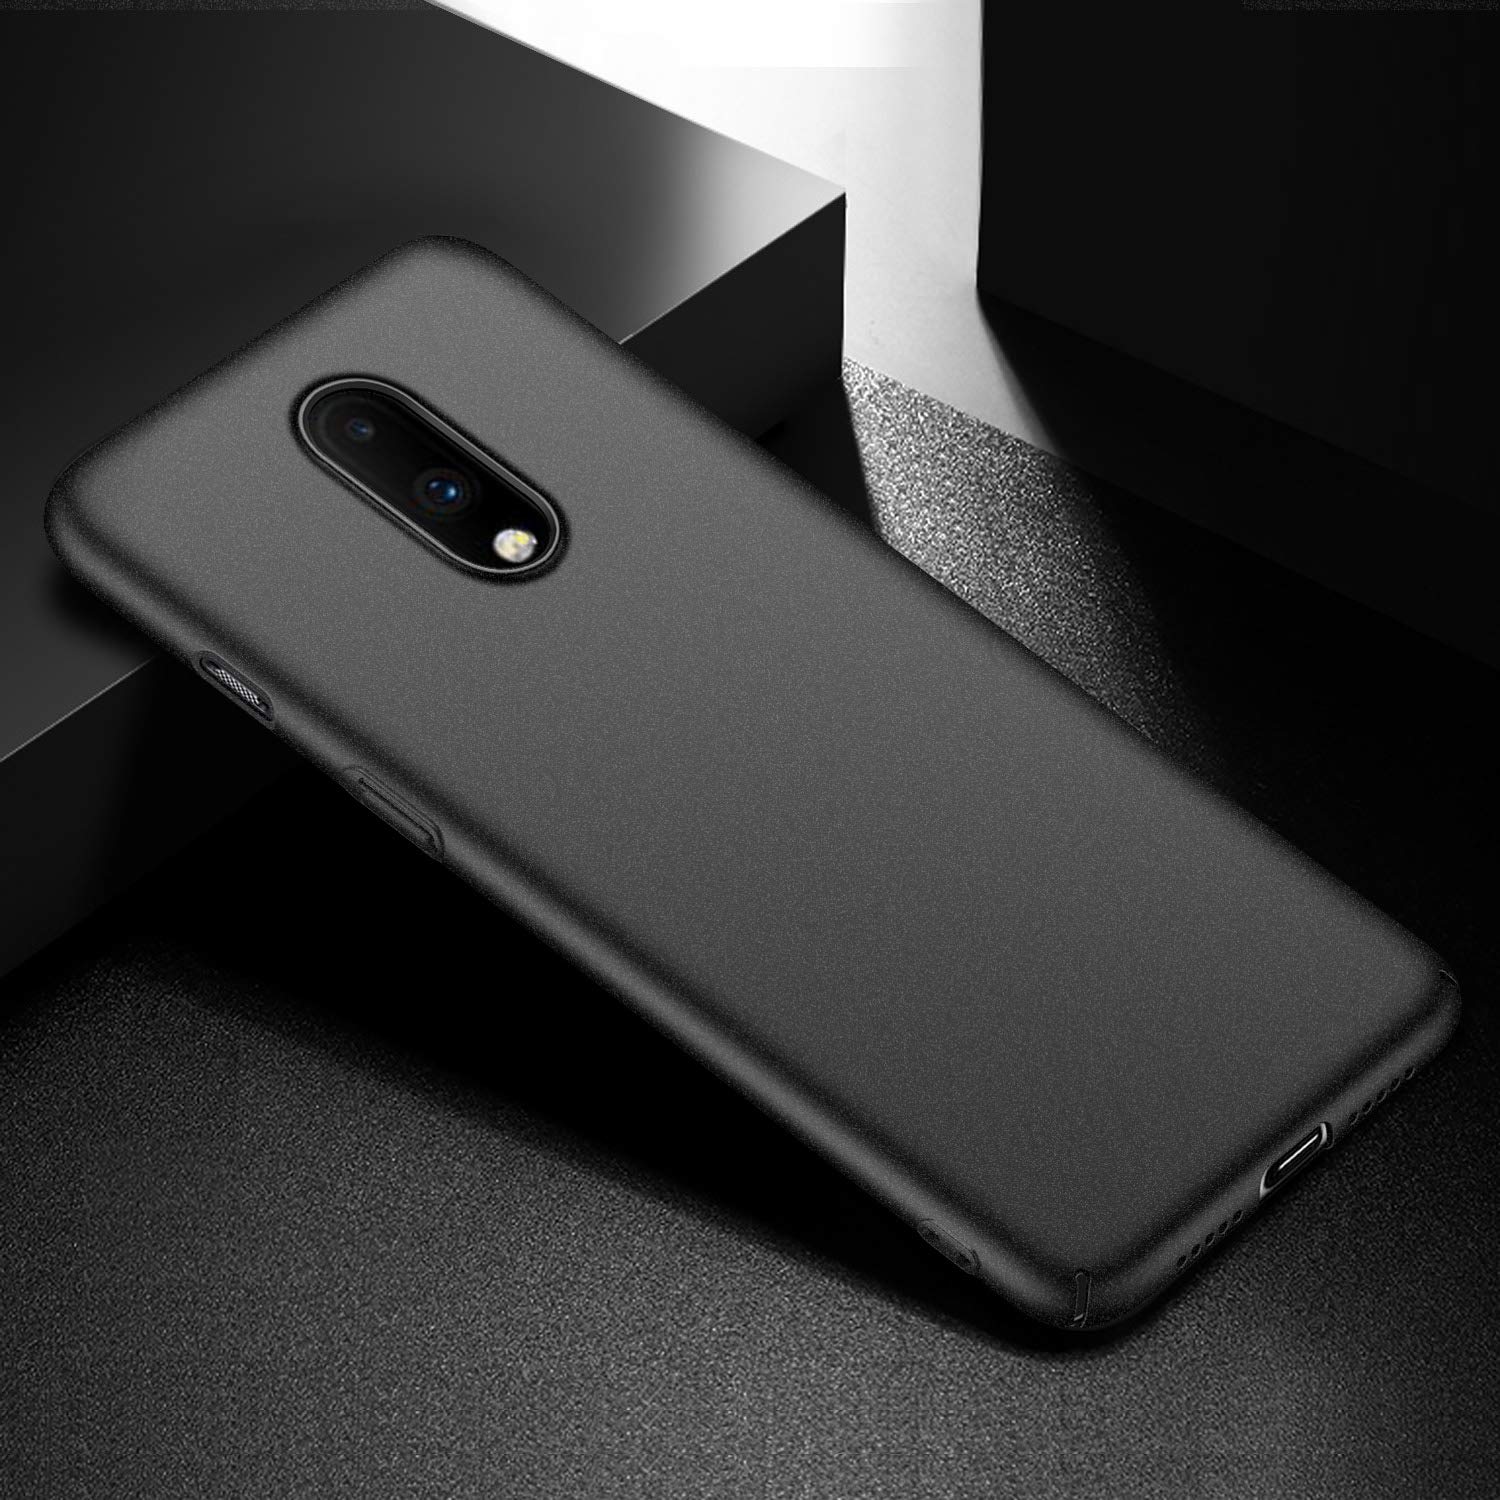 Banzn OnePlus 7 Cases and Covers